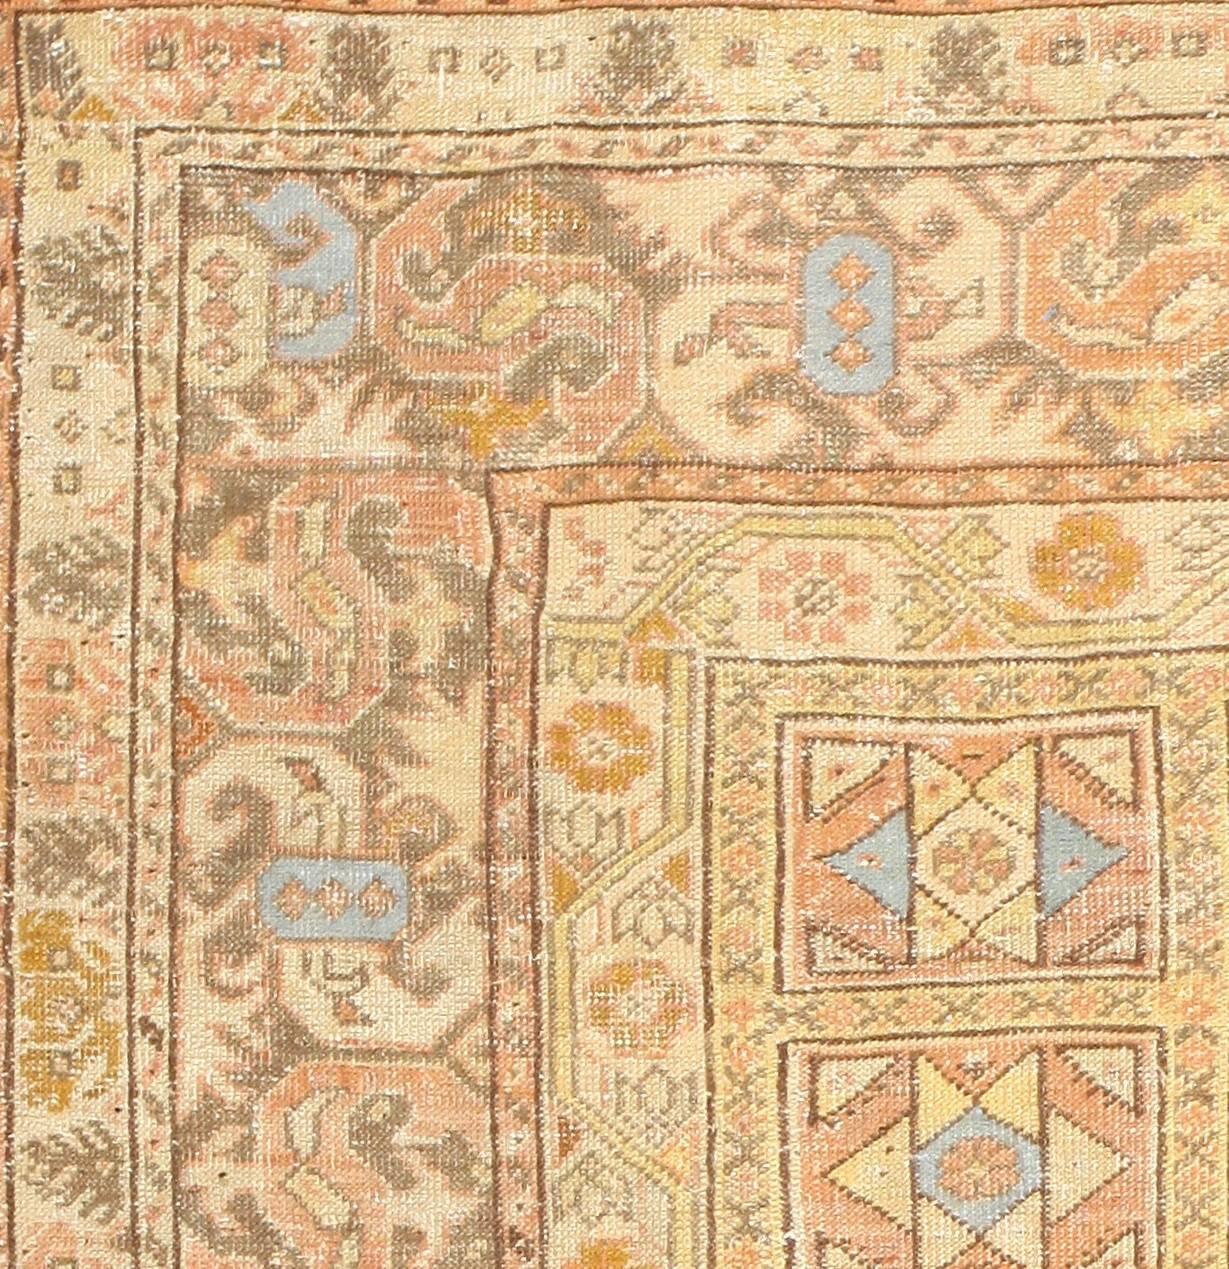 Hand-Knotted Antique Square Decorative Turkish Oushak Rug. Size: 6 ft 8 in x 6 ft 8 in